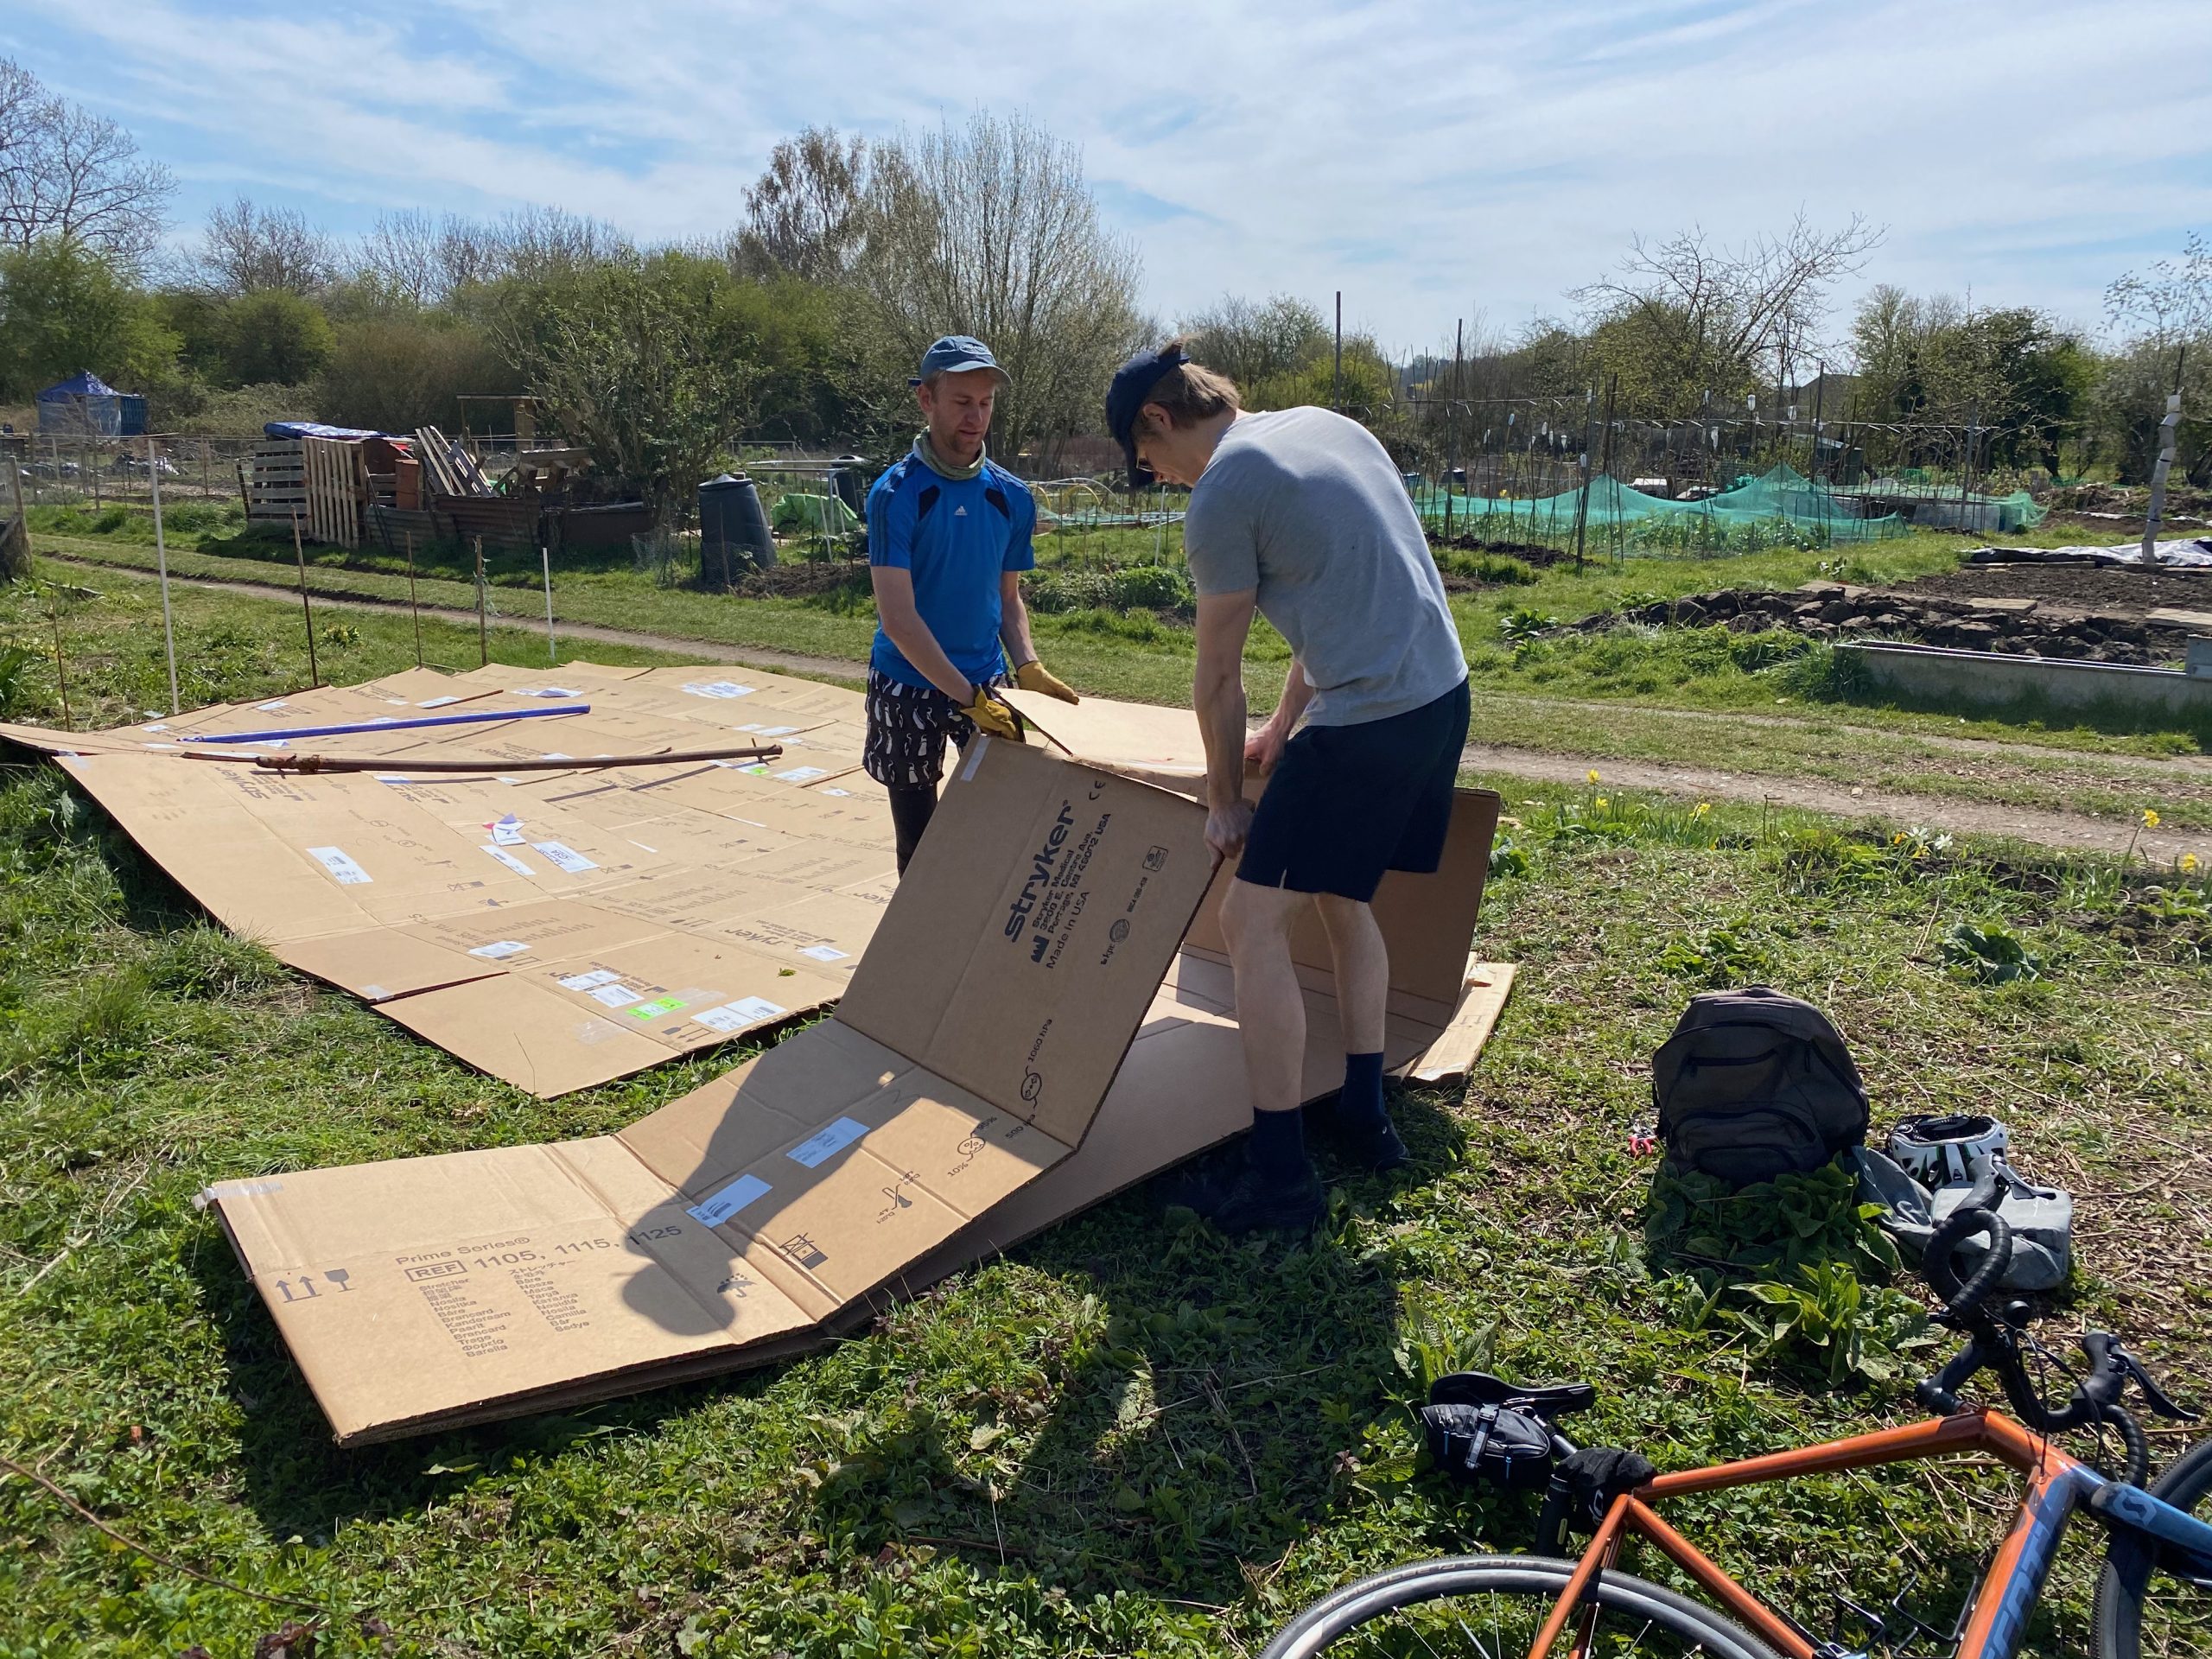 Allotment team members lay large sheets of cardboard on the soil to use as compsot